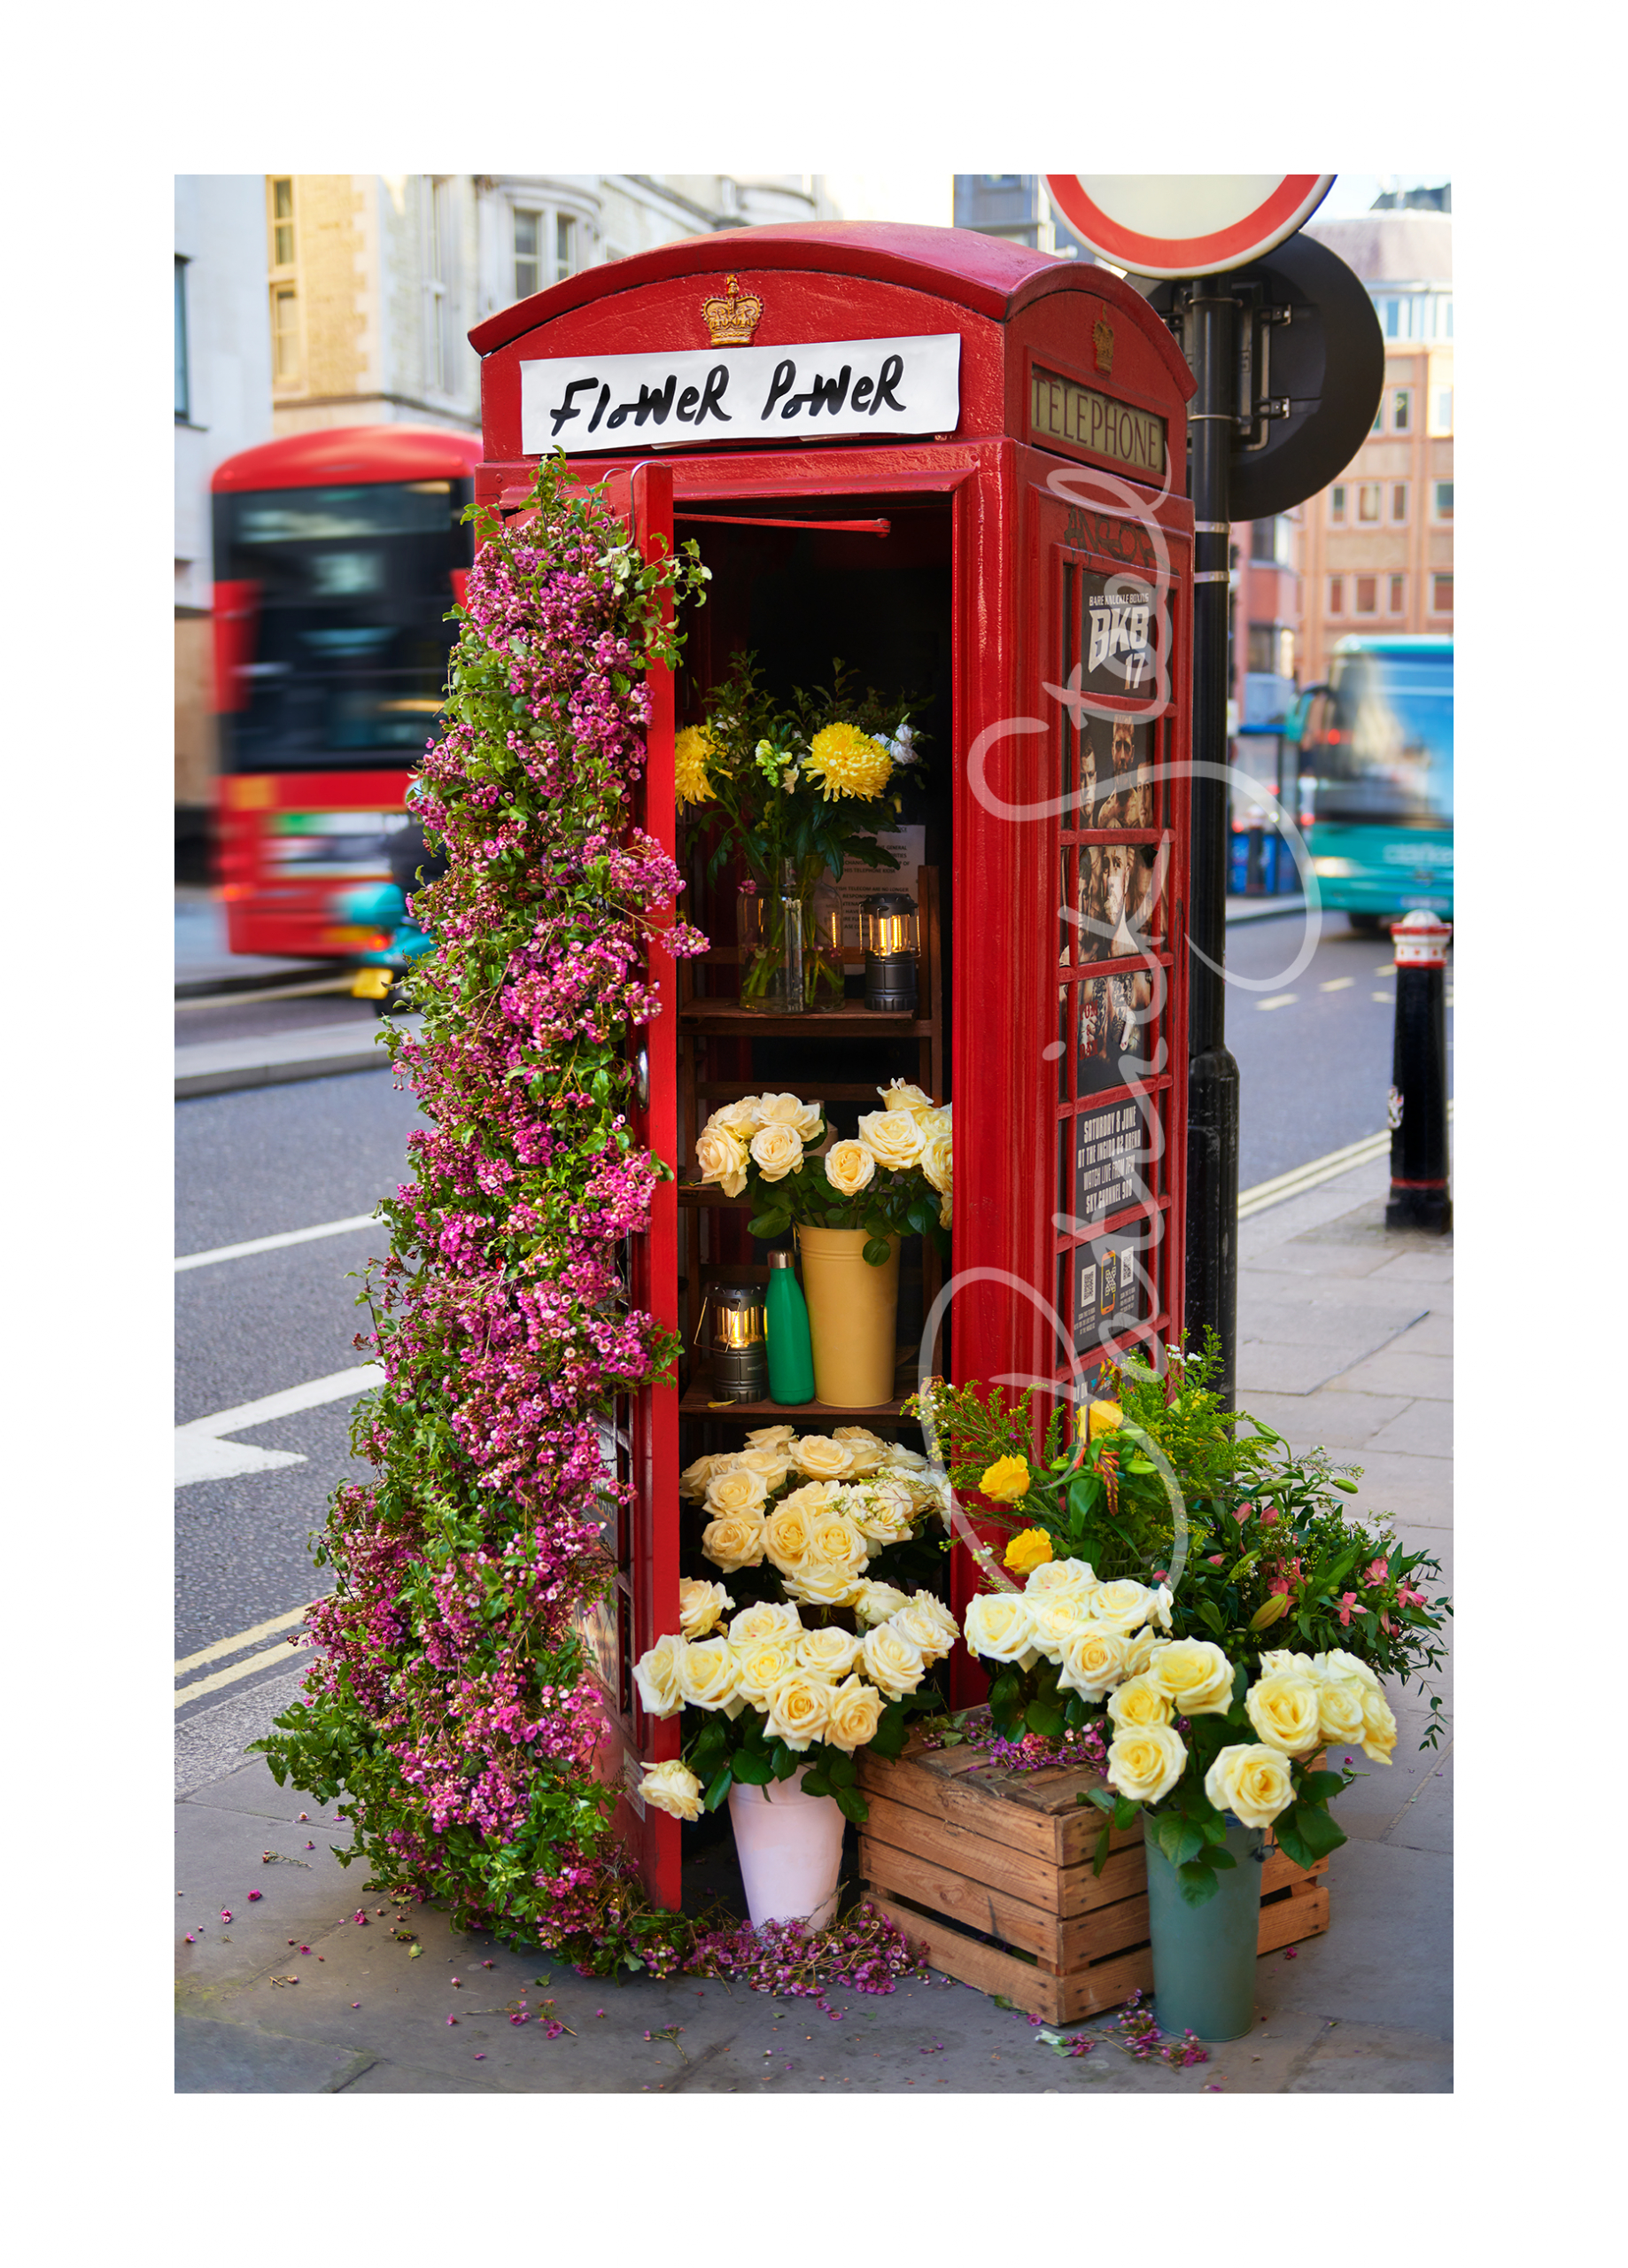 limited edition photograph of a red telephone box on fleet street london by british photographer patrick steel